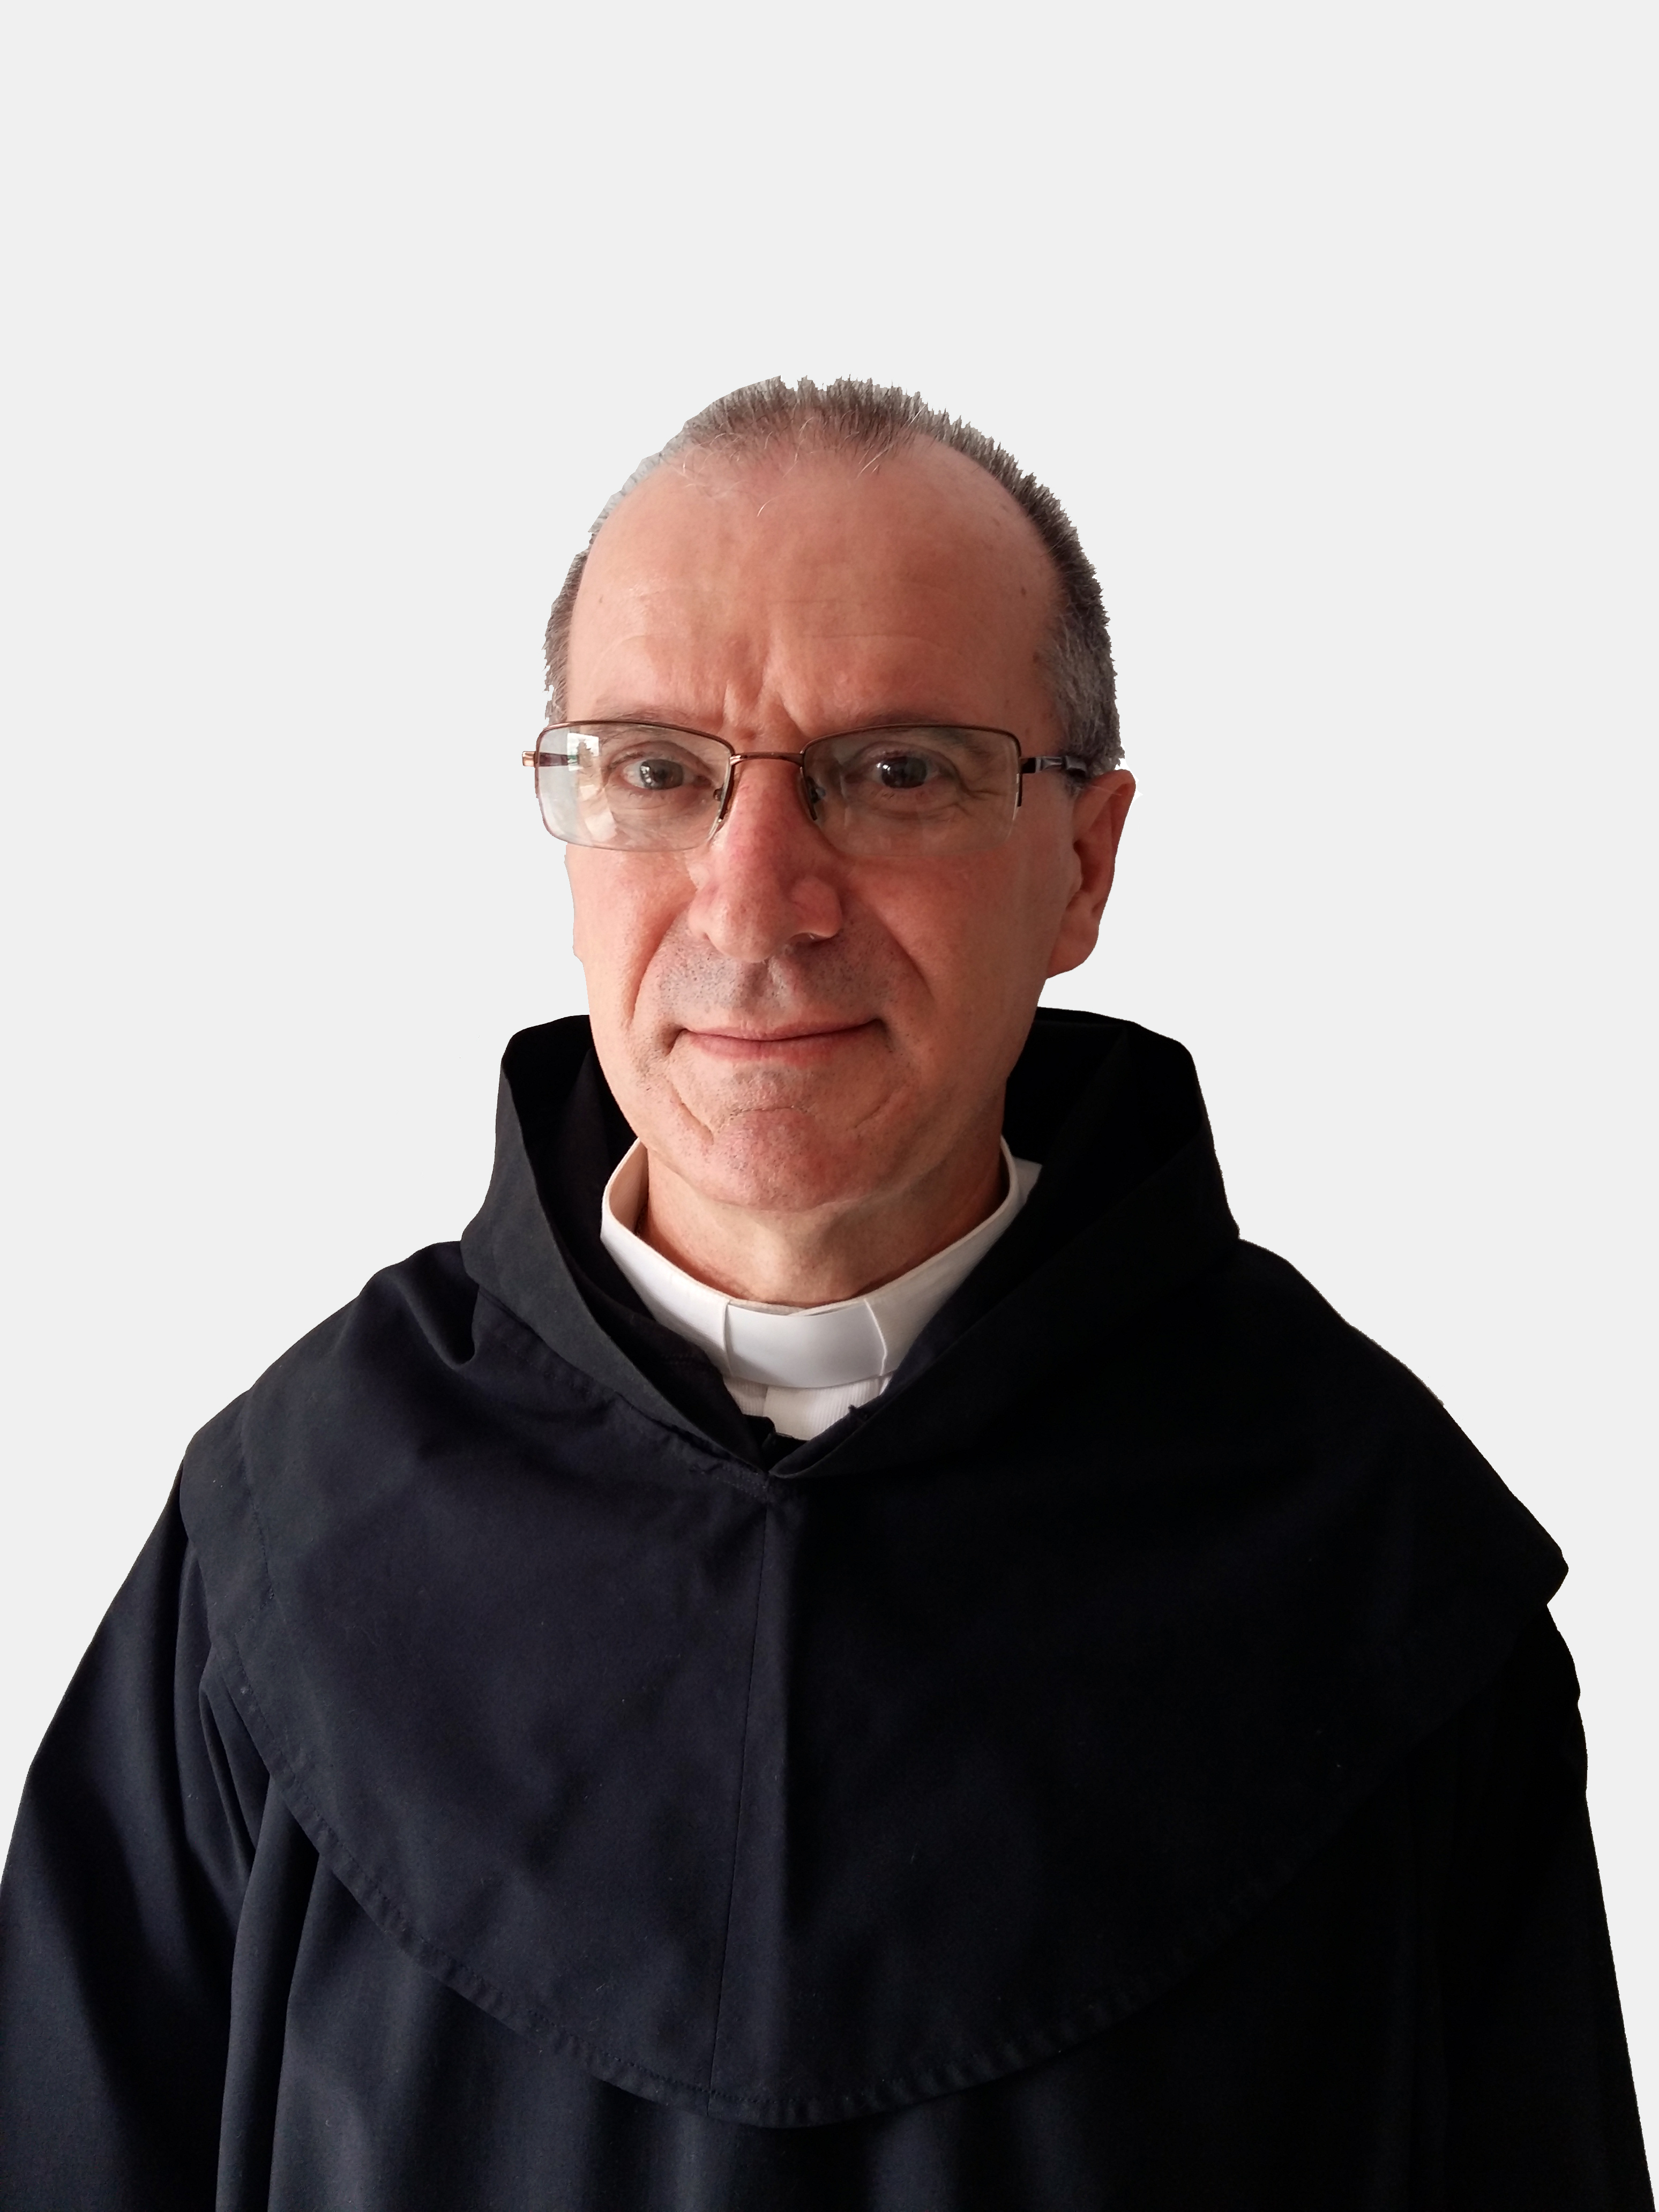 The Holy Father appointed an augustinian recollect Santiago Sanchez Sebastian bishop of the Prelature of Labrea, Amazons, Brazil